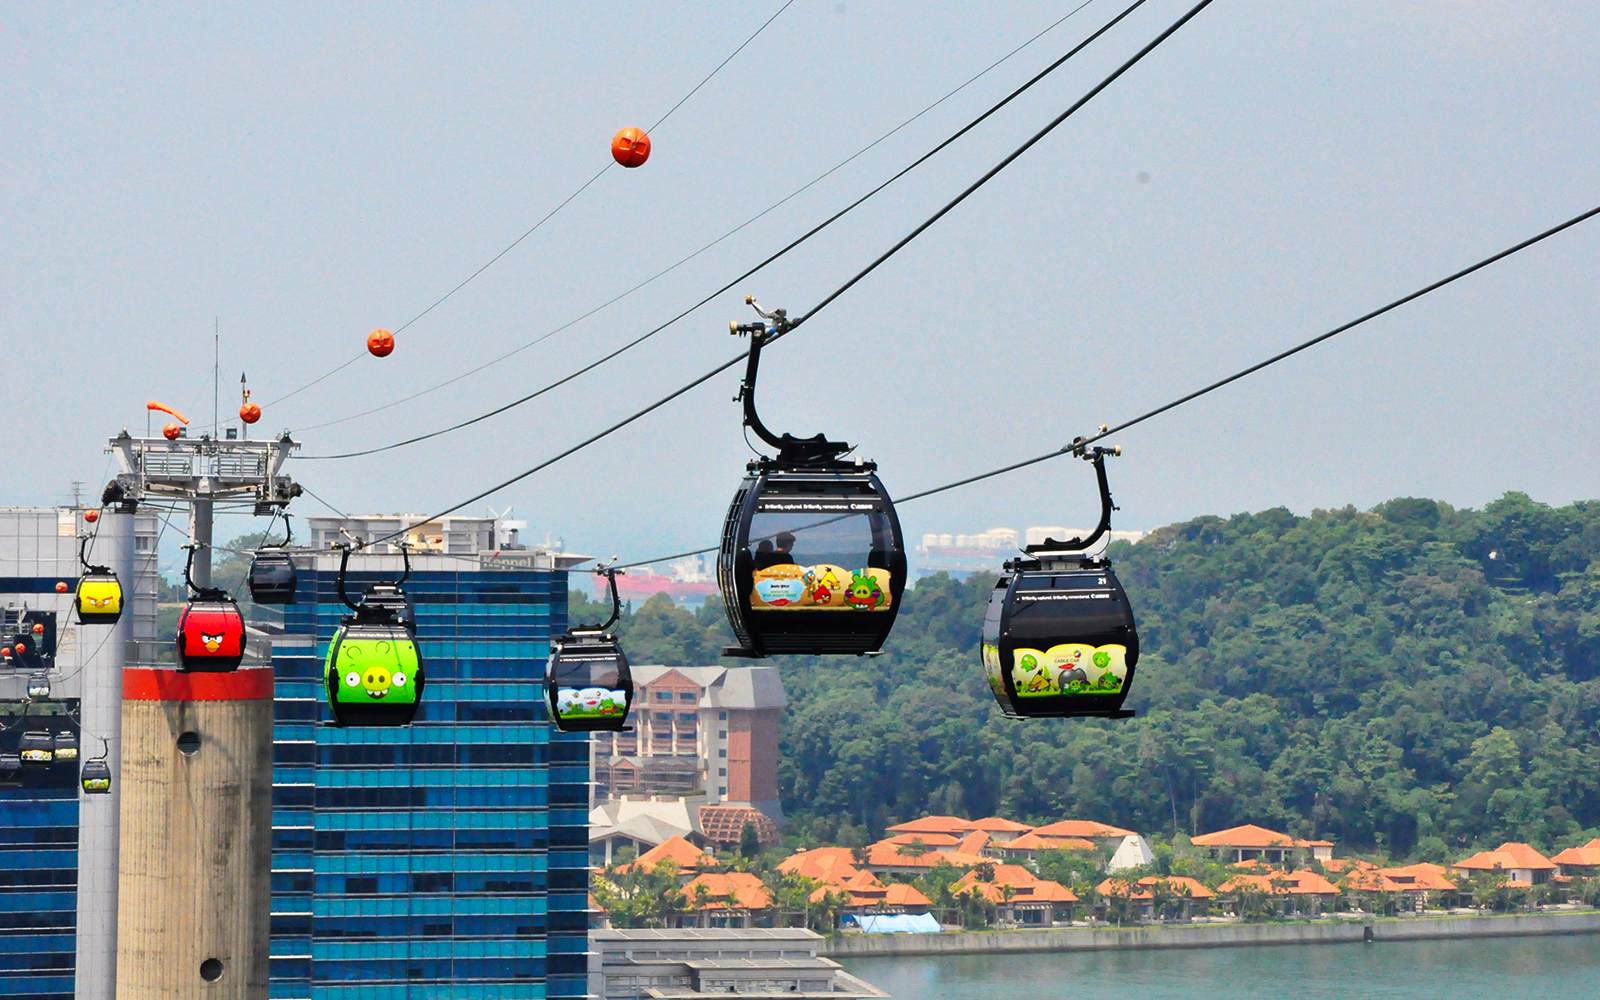 Sentosa Island Tour - Cable Car + Skyride & luge  (2 Rides) + Wings Of Time With Shared Transfers